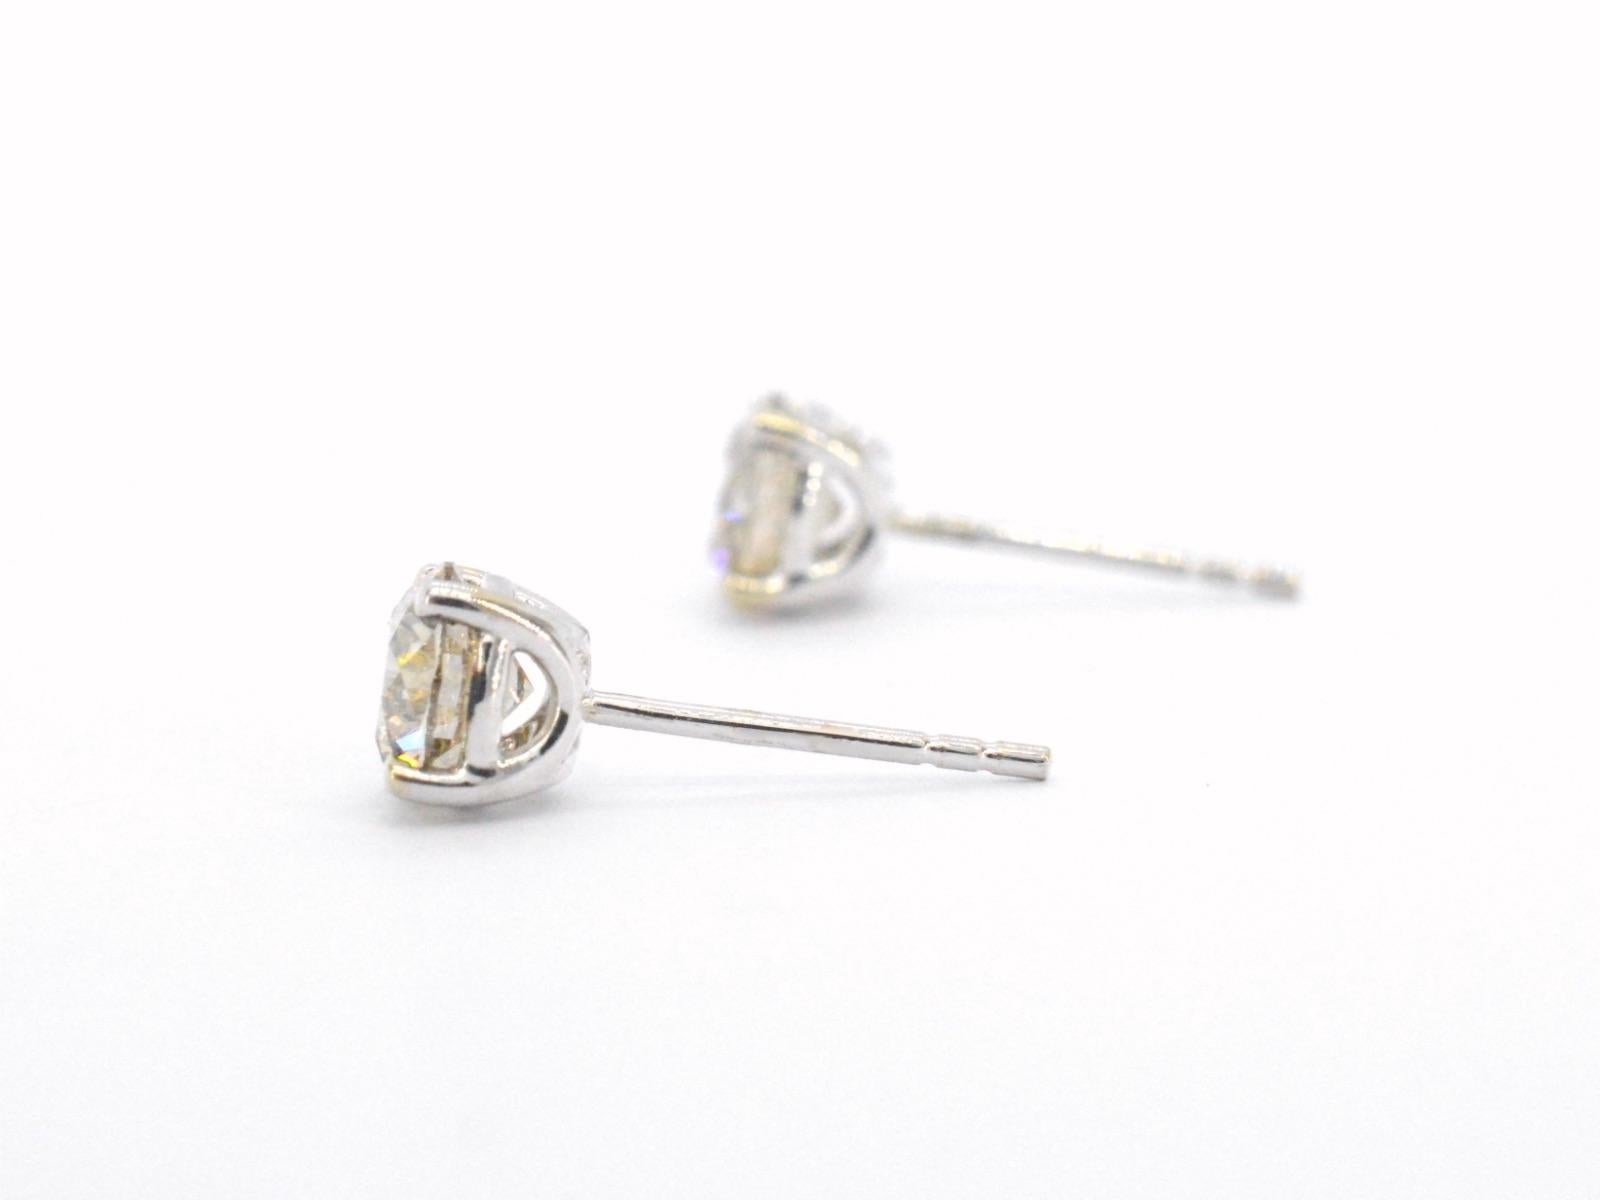 Brilliant Cut Gold Solitaire Earrings with Champagne Diamond For Sale